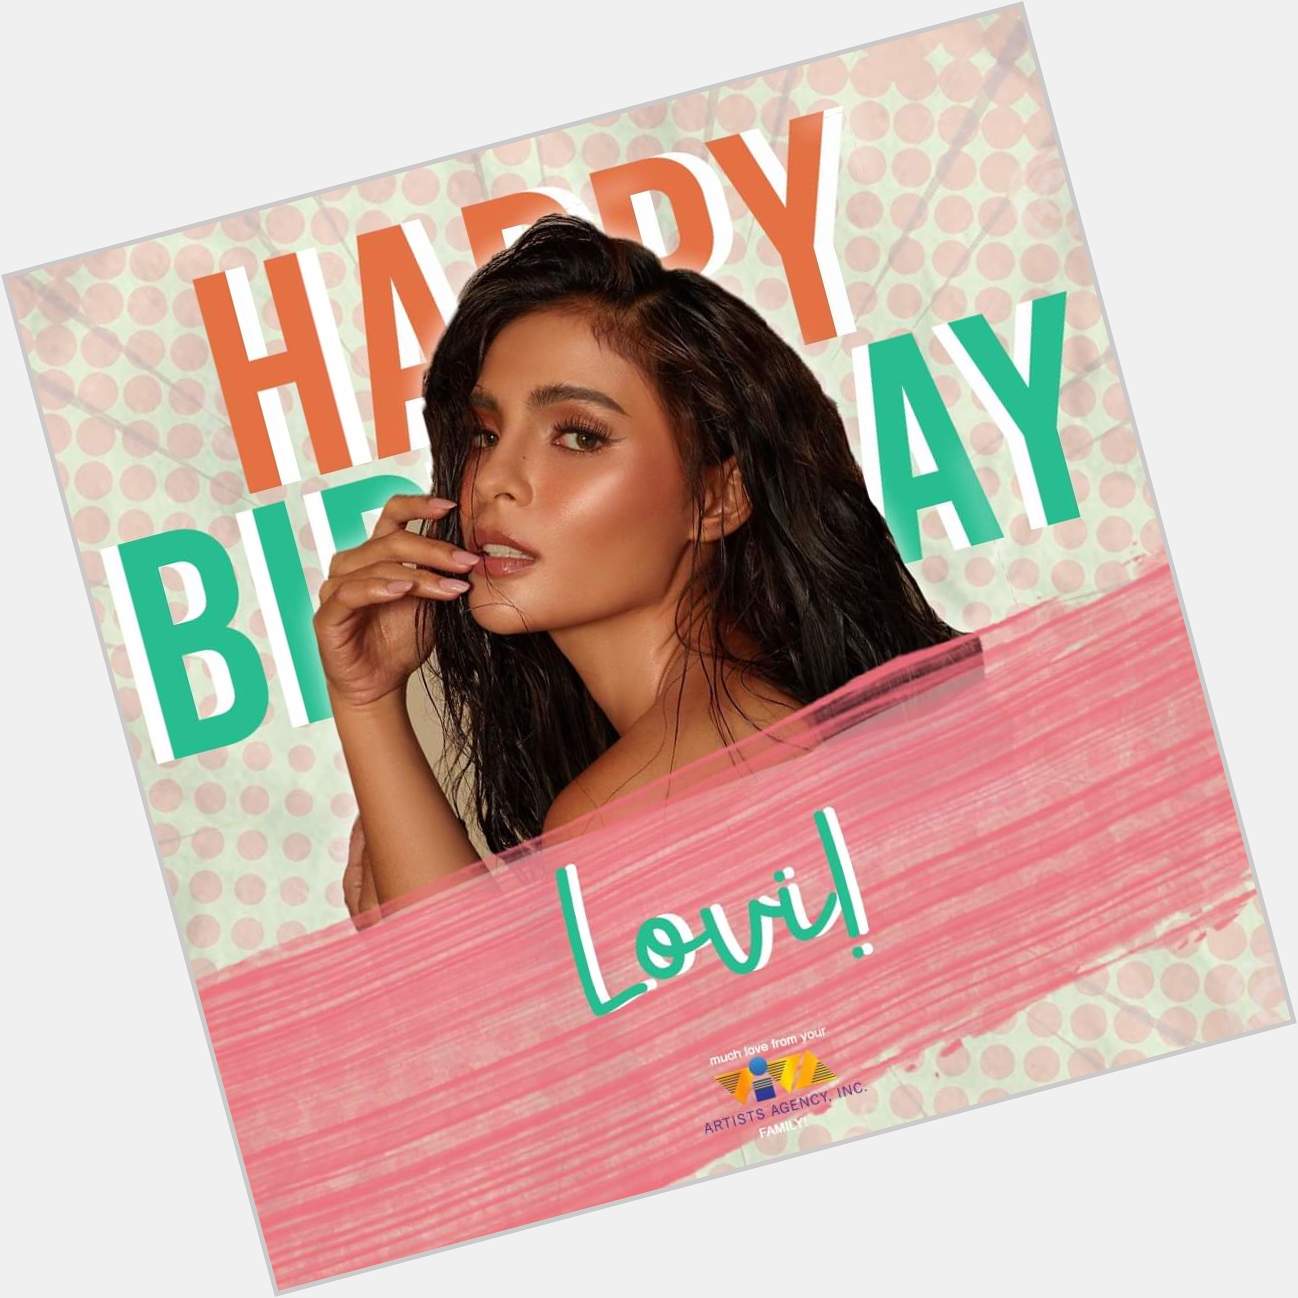 Belated Happy Birthday Lovi Poe! May all your wishes come true!   